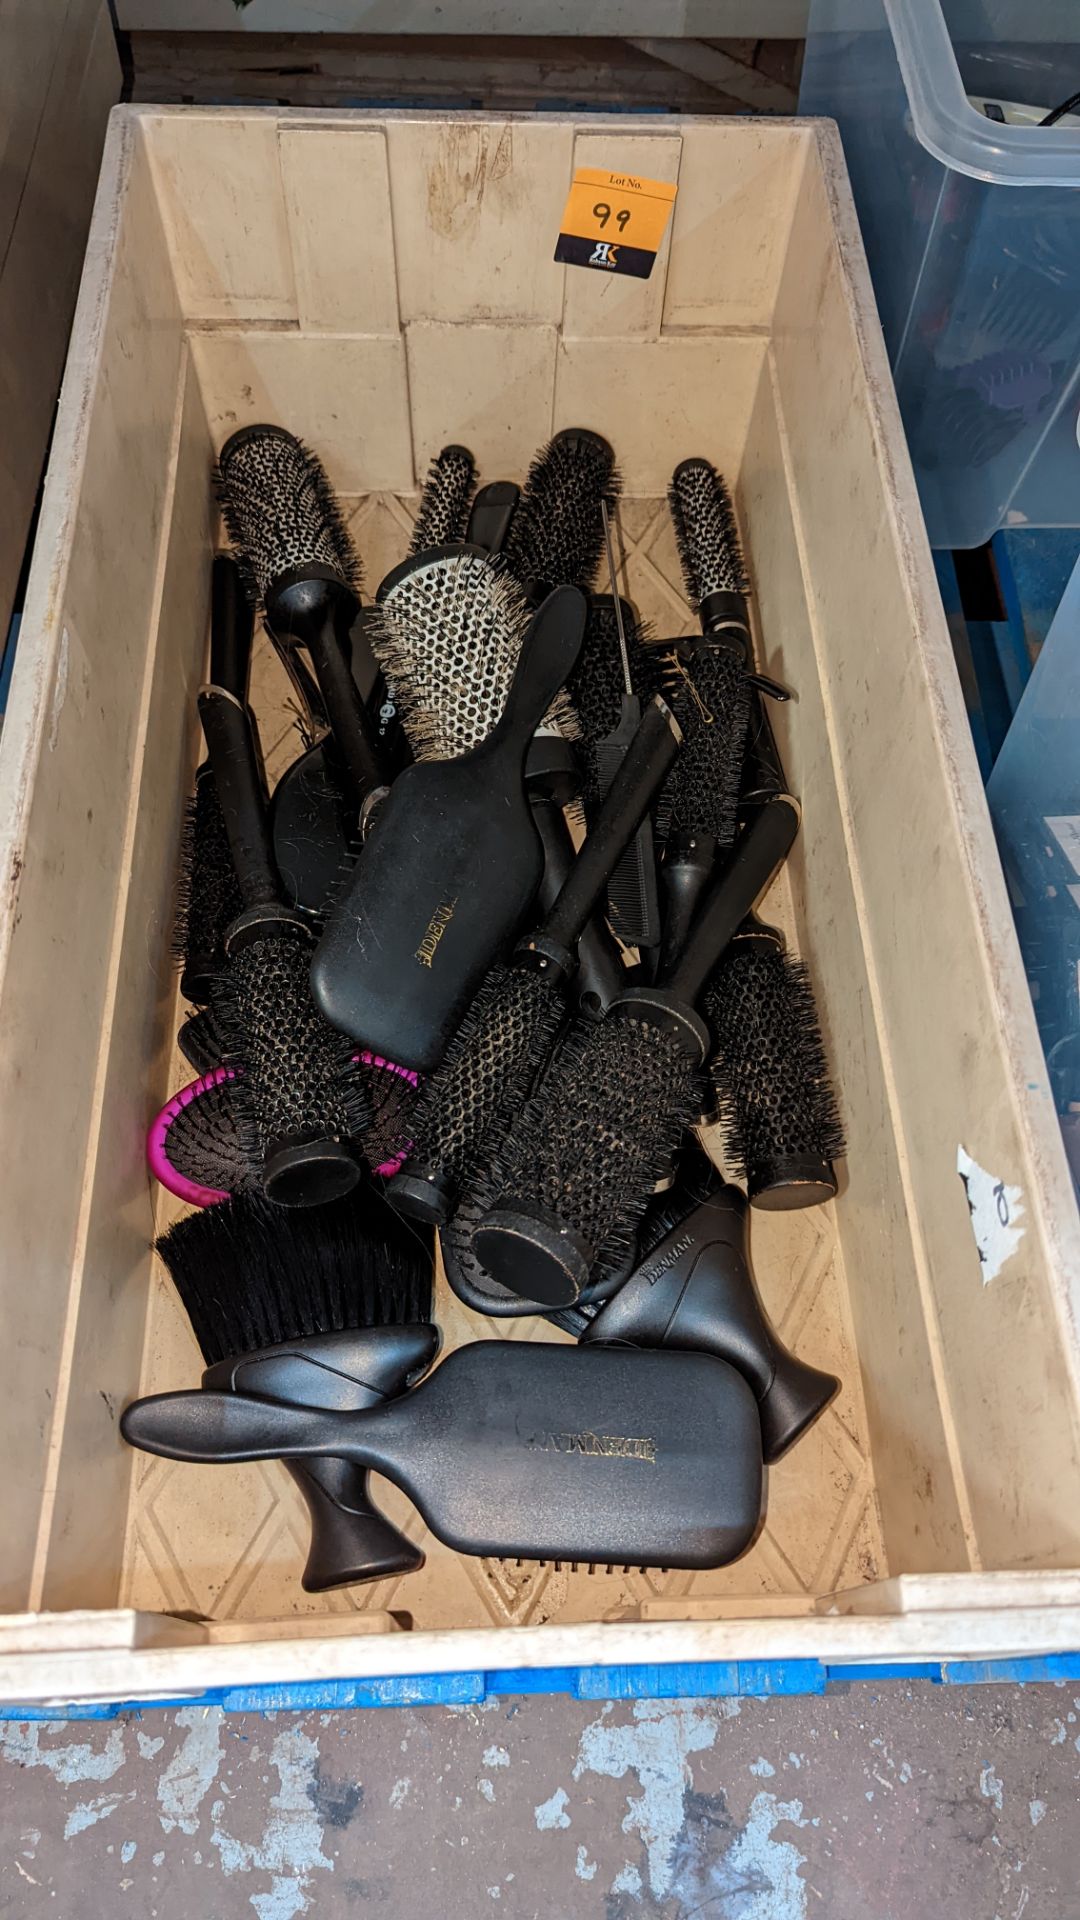 Contents of a crate of hairbrushes & similar - crate excluded